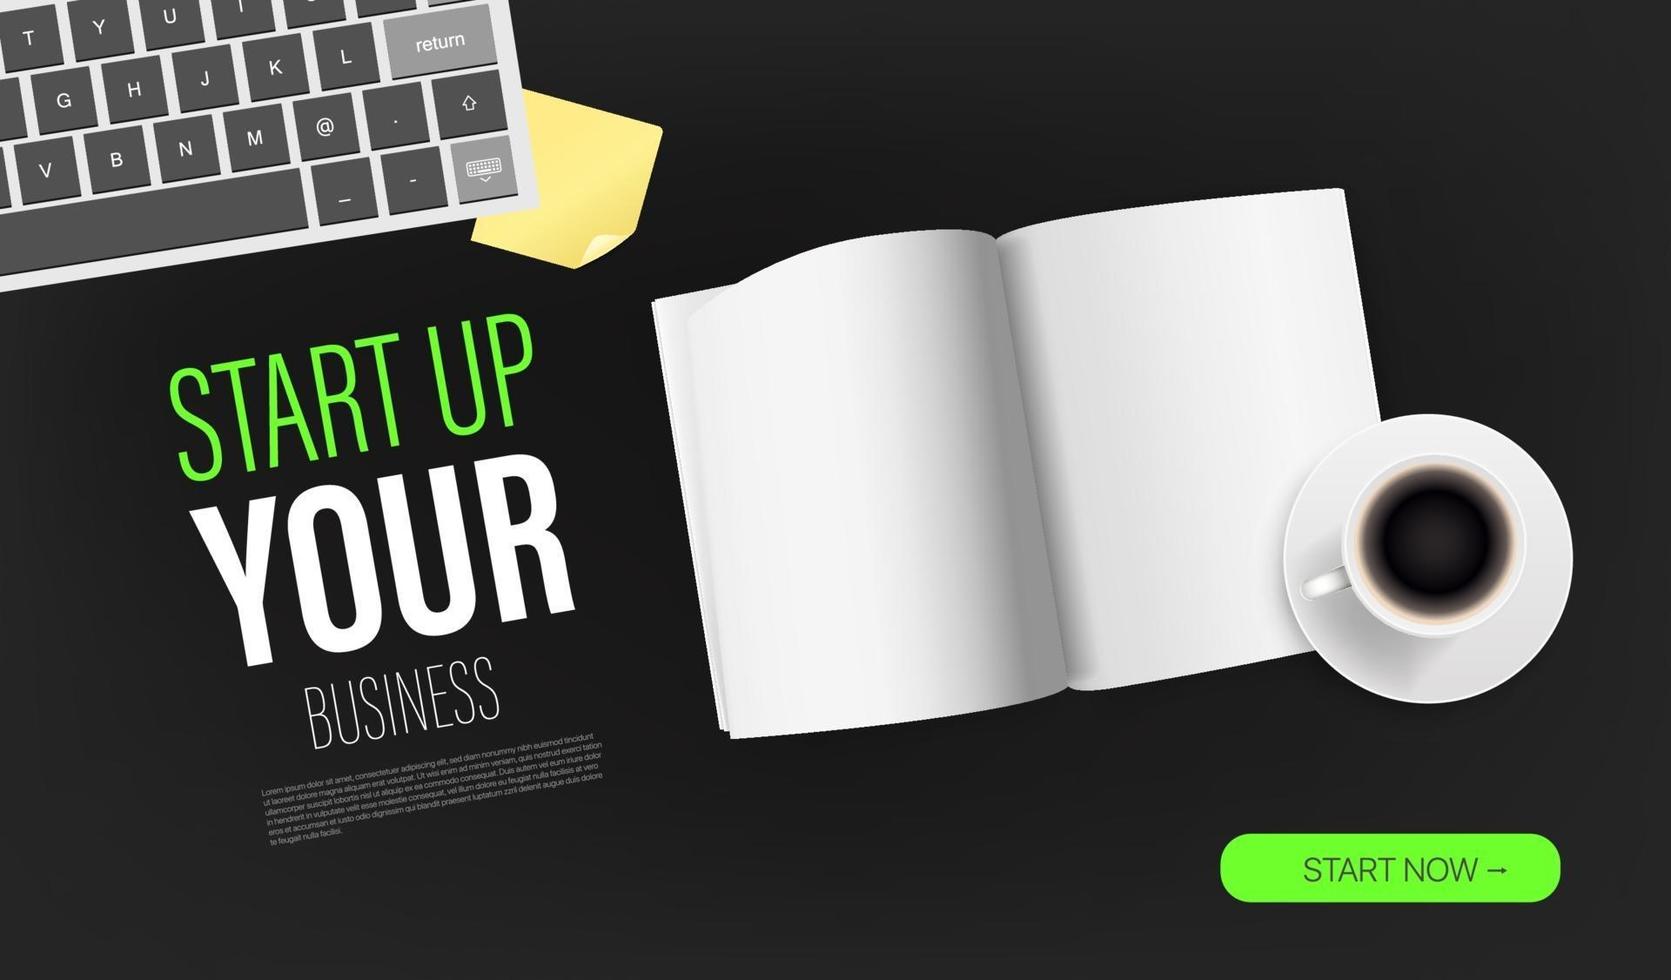 Start up your business promo landing page template with paper book and sample text. Top view vector layout